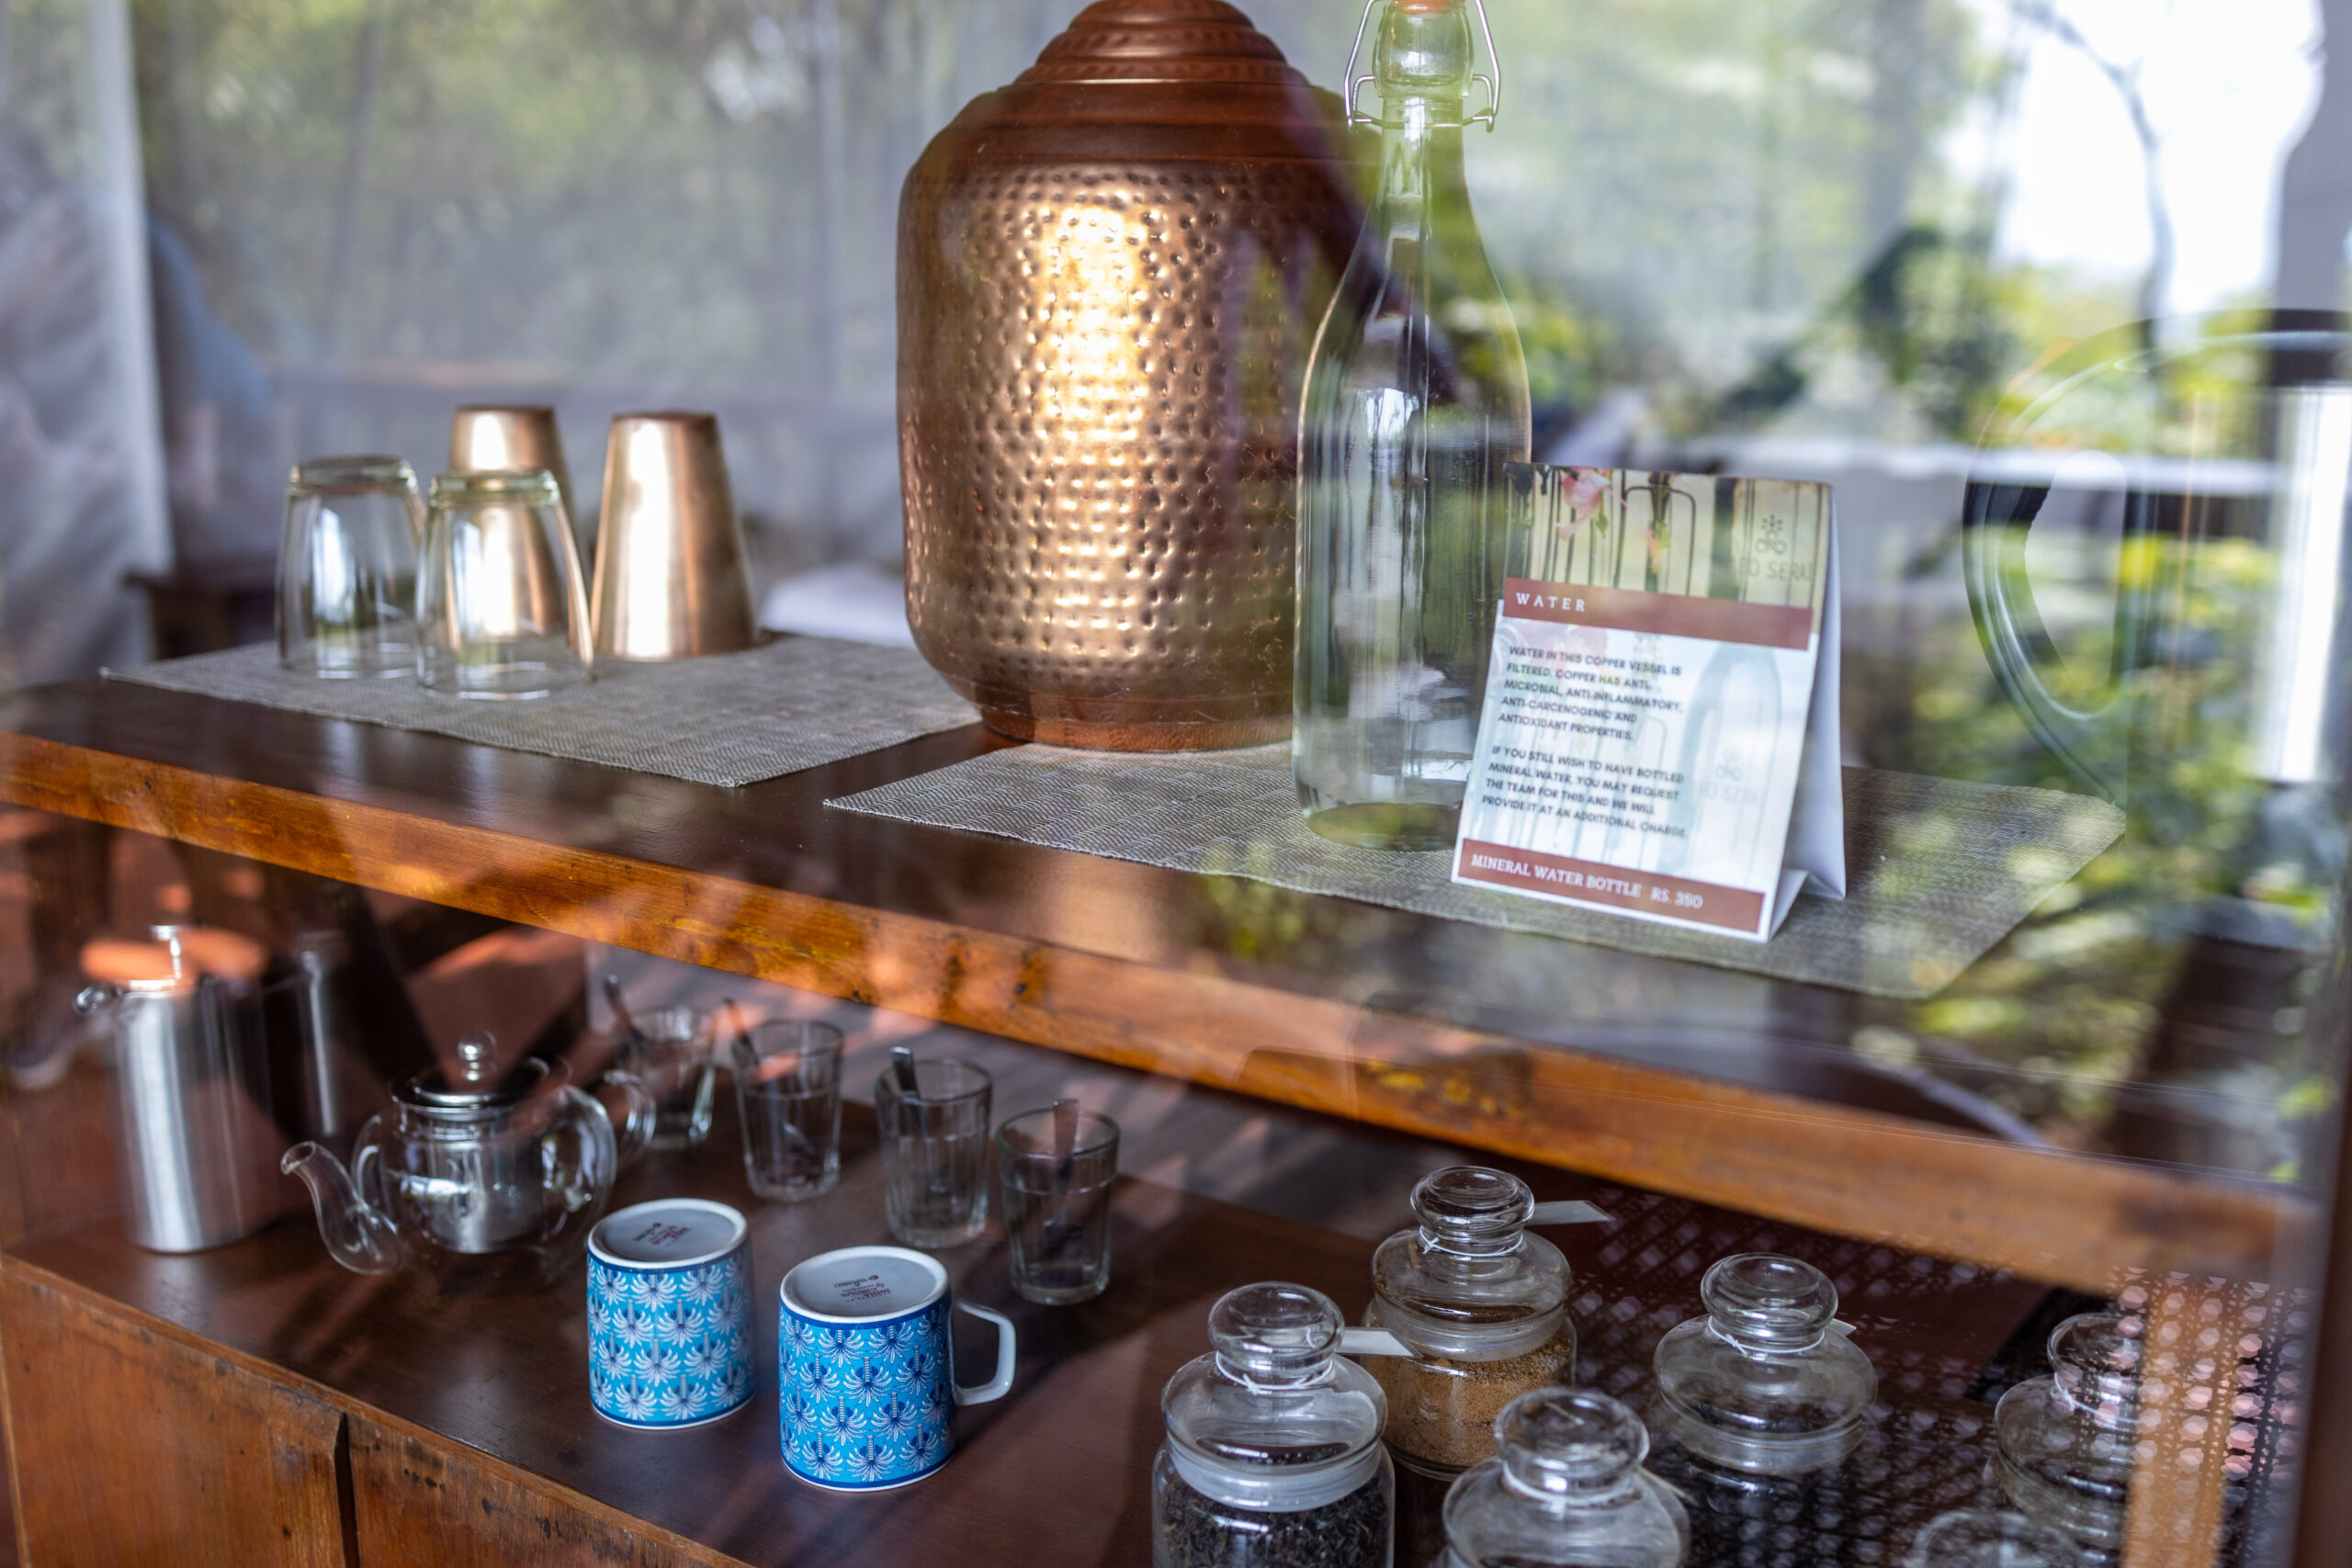 Copper water vessel and tea/coffee setup in rooms